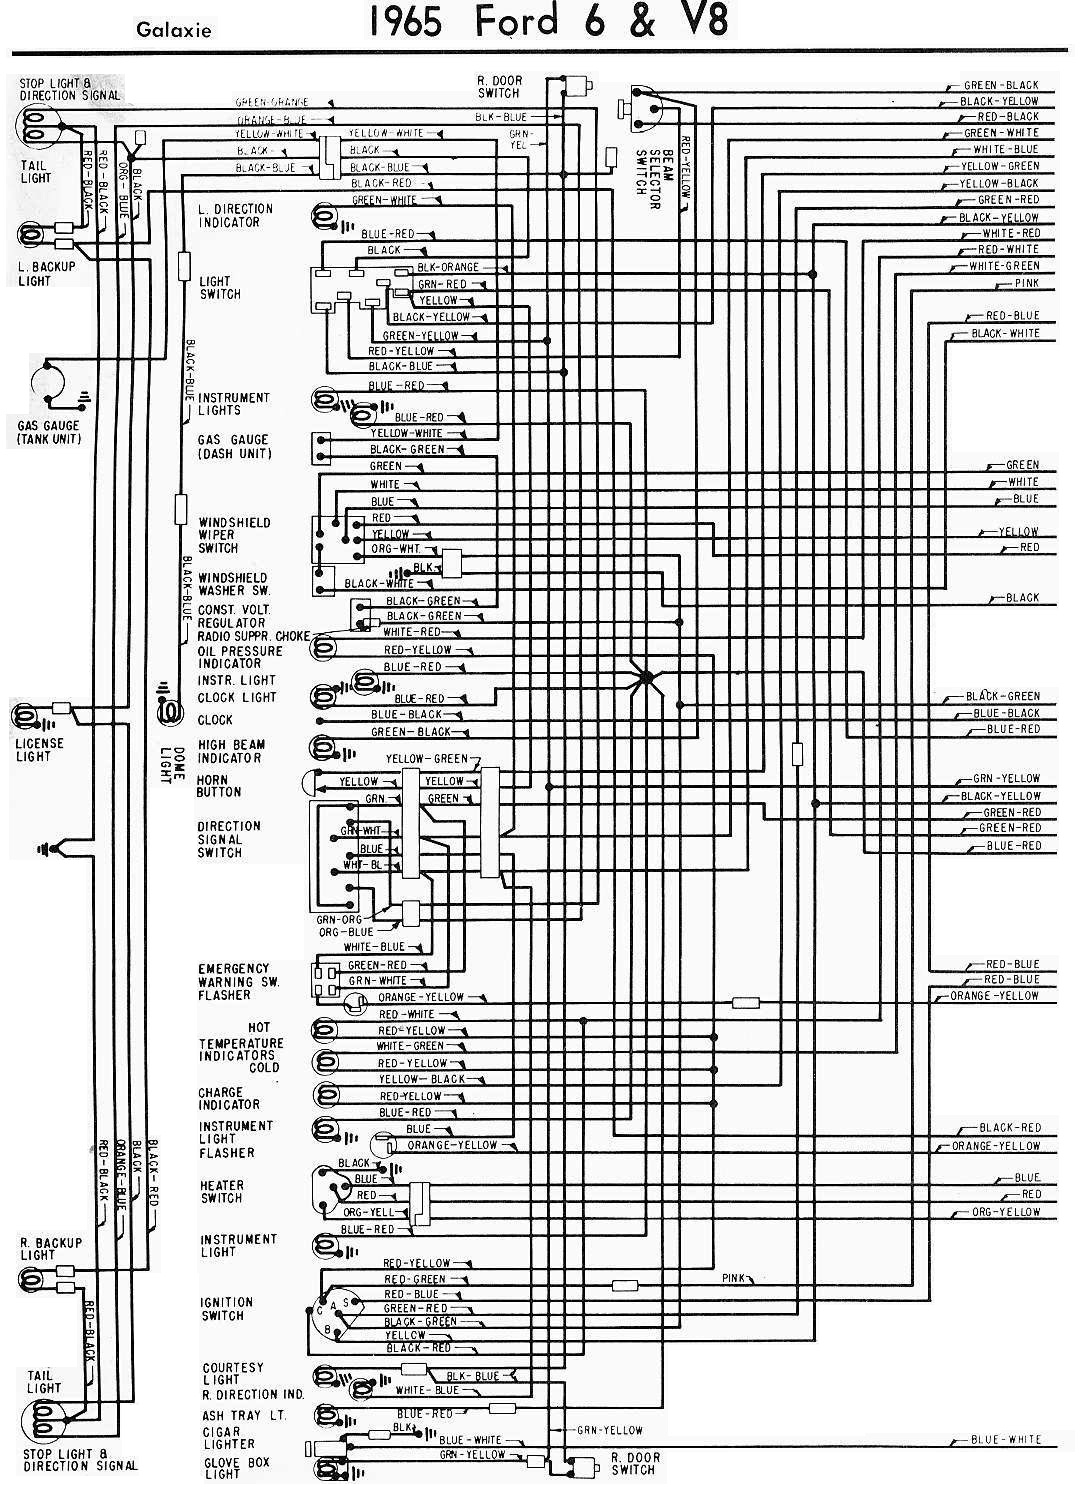 1956 Ford F100 Wiring Diagram from 3.bp.blogspot.com